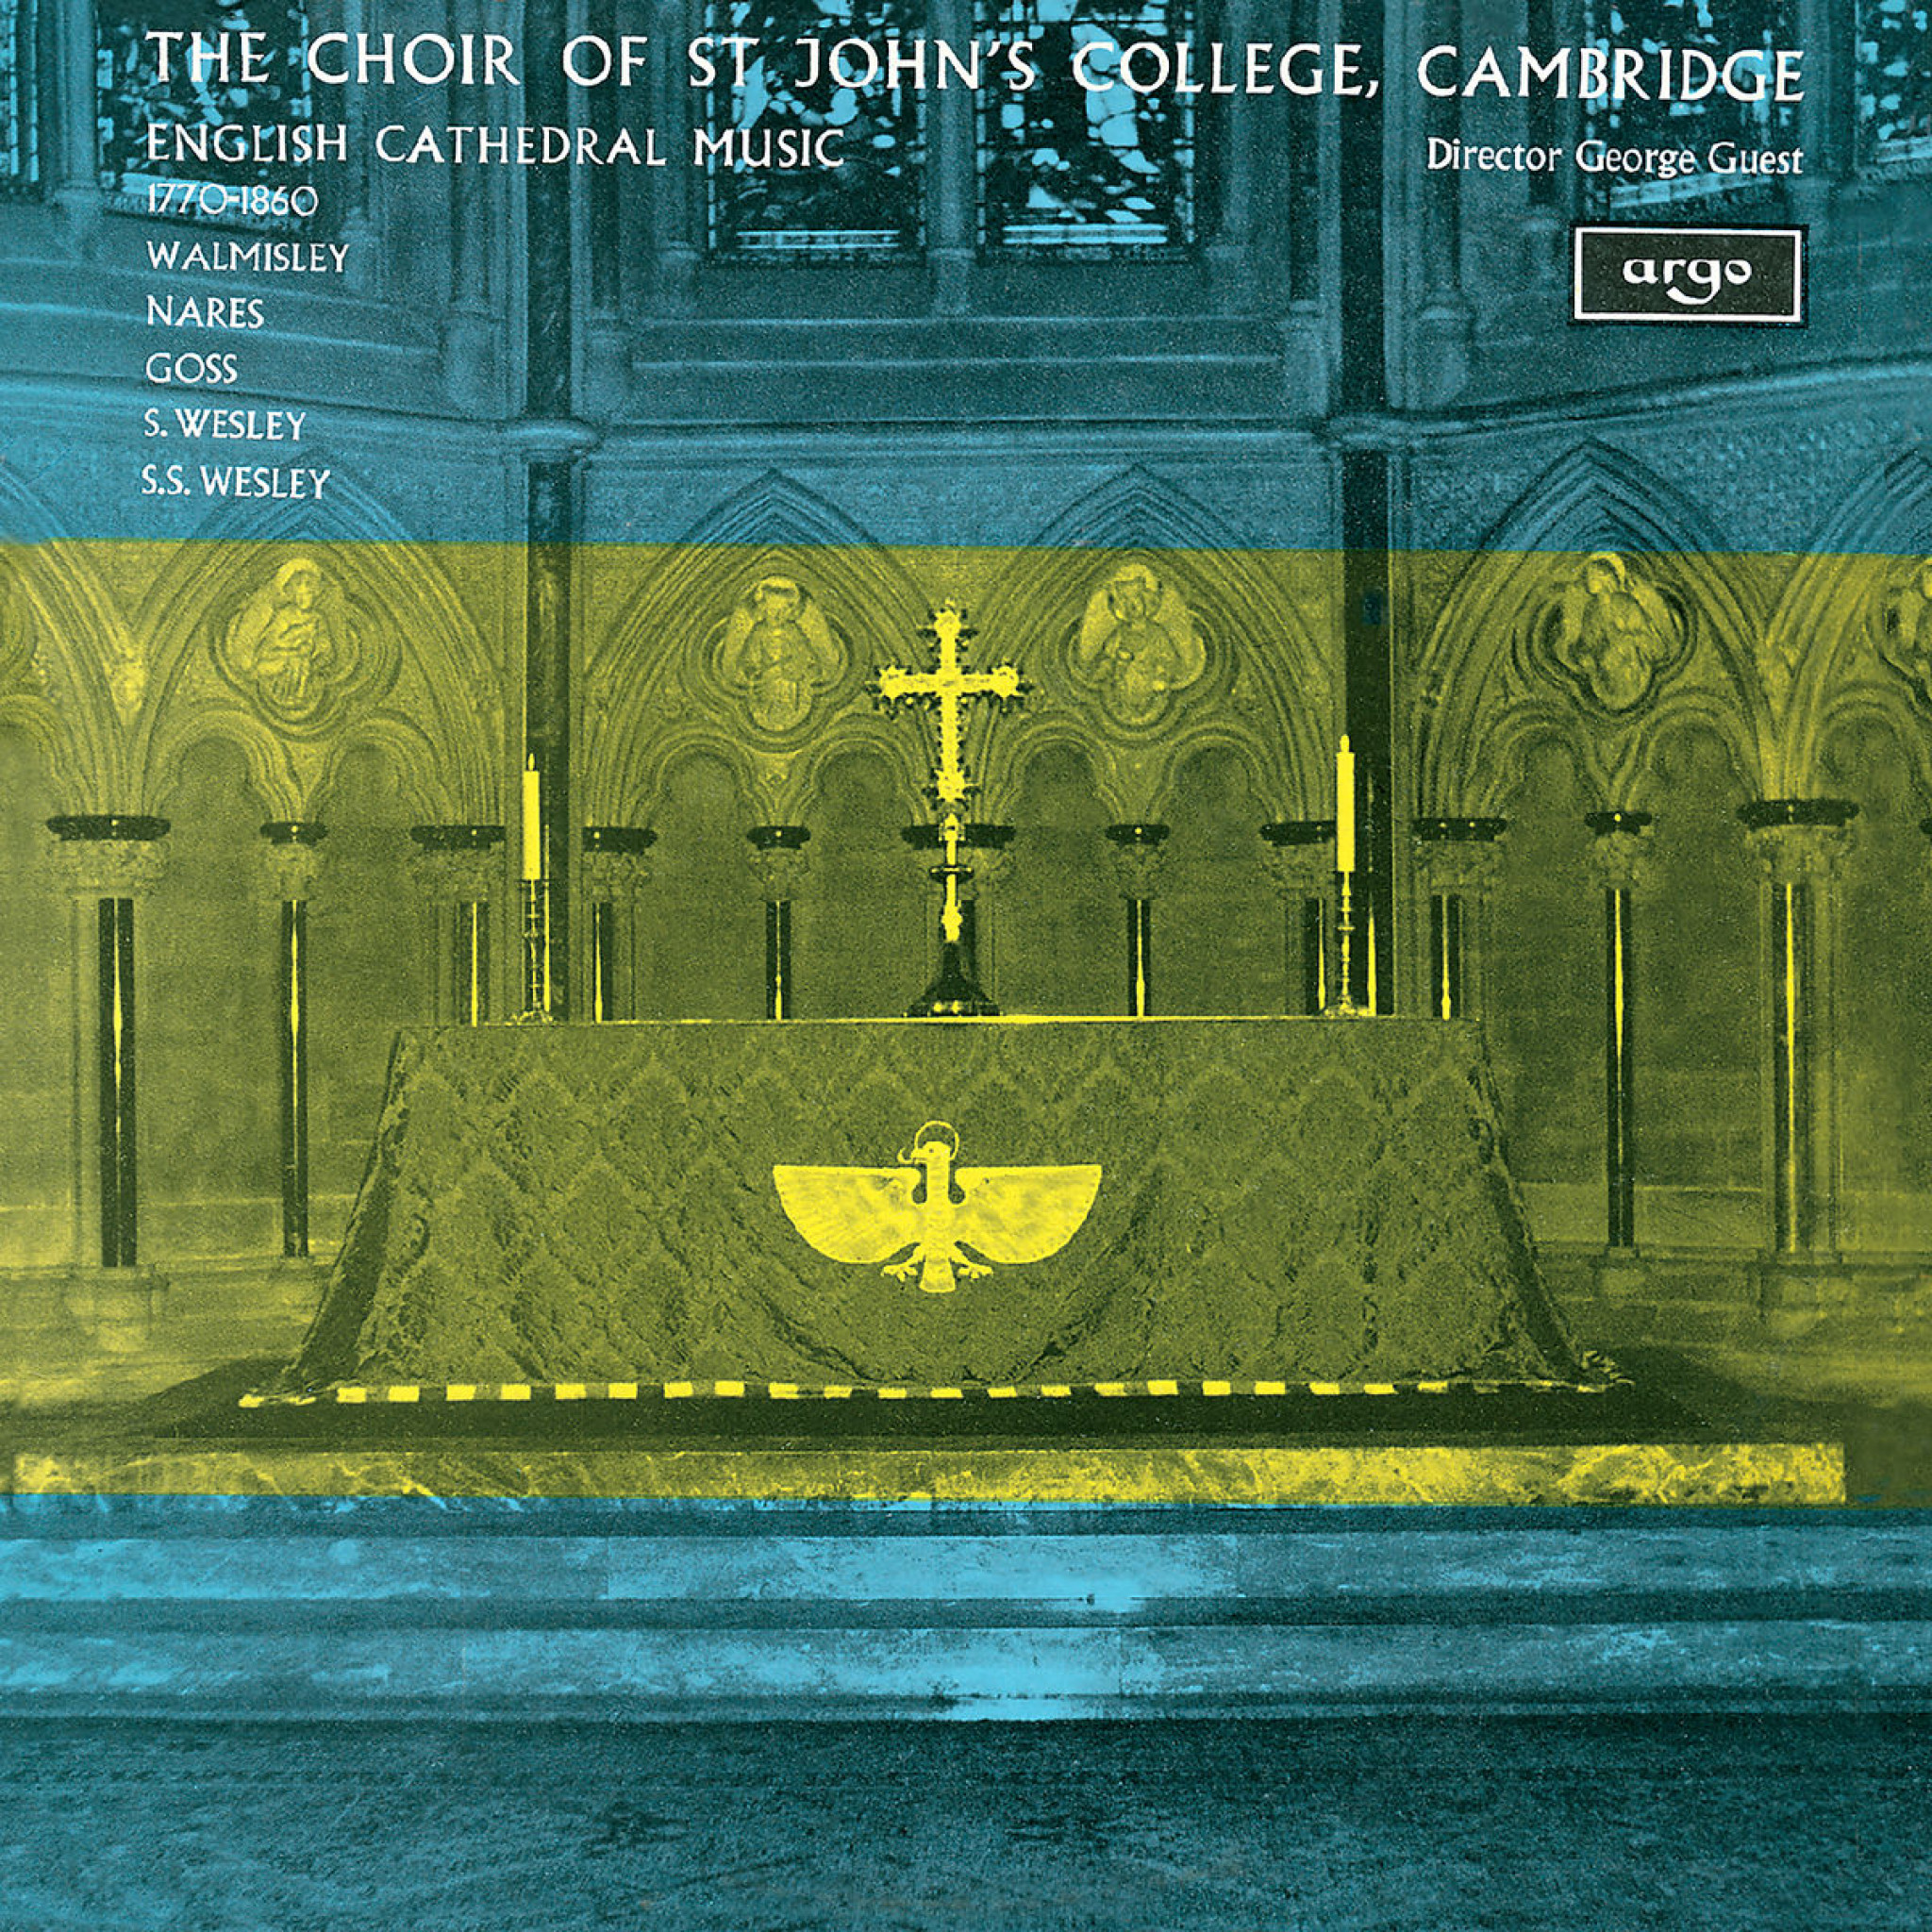 ENGLISH CATHEDRAL MUSIC